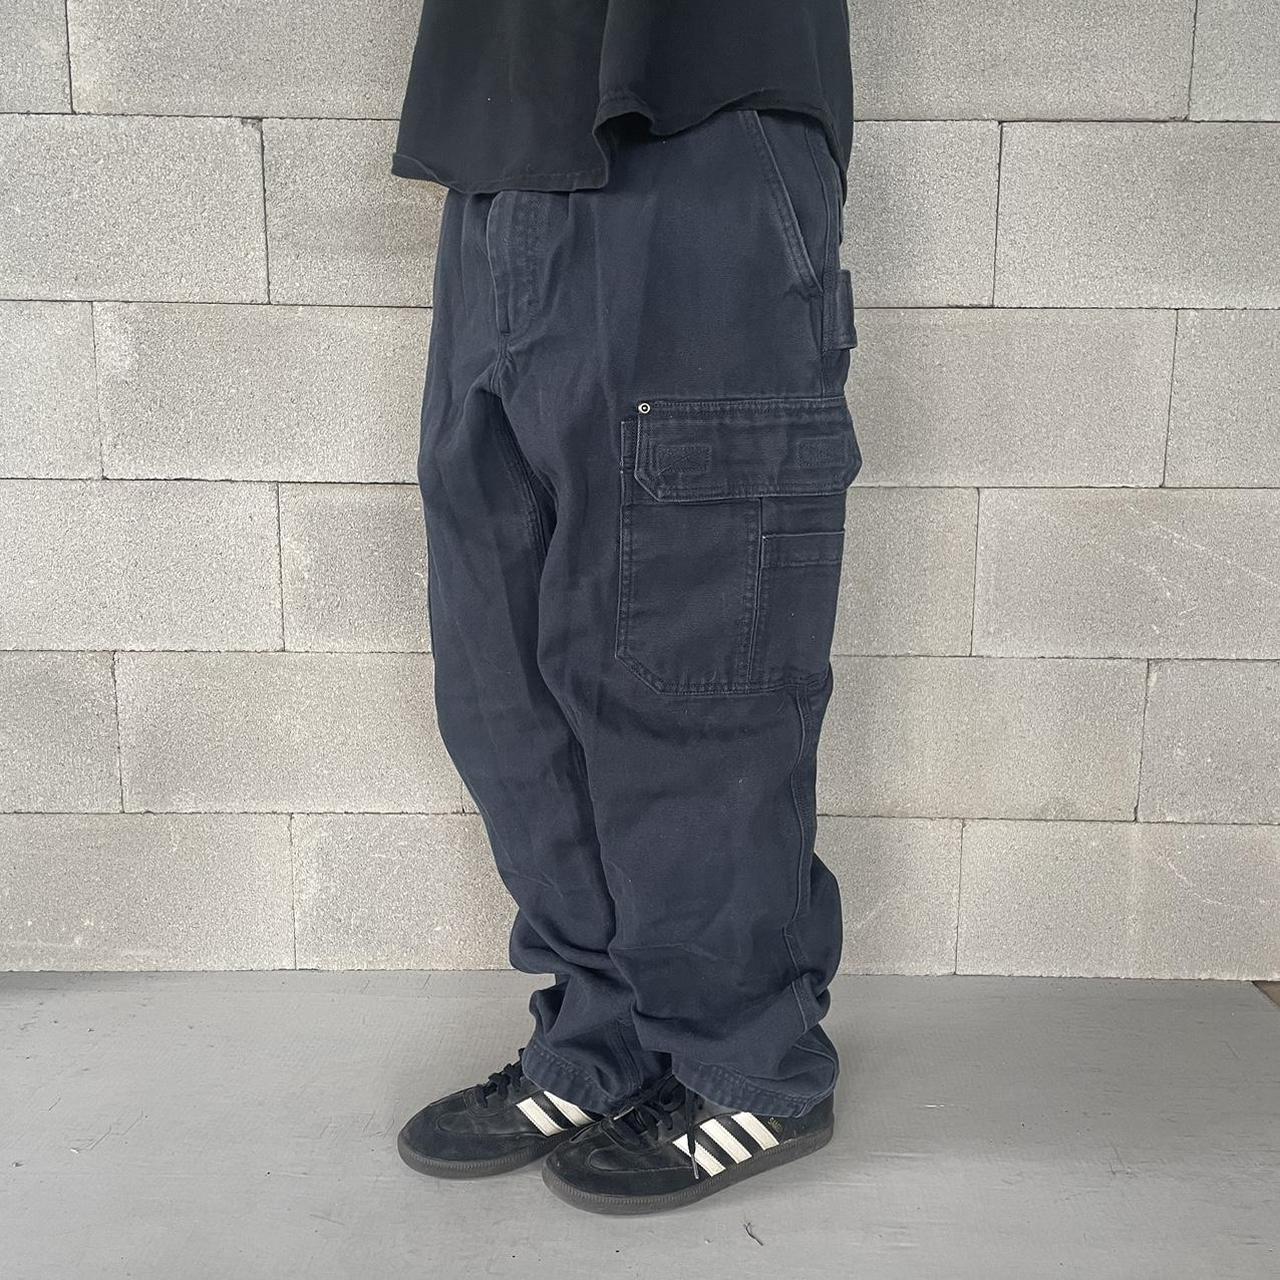 Baggy Deluth black cargo pants Great condition... - Depop